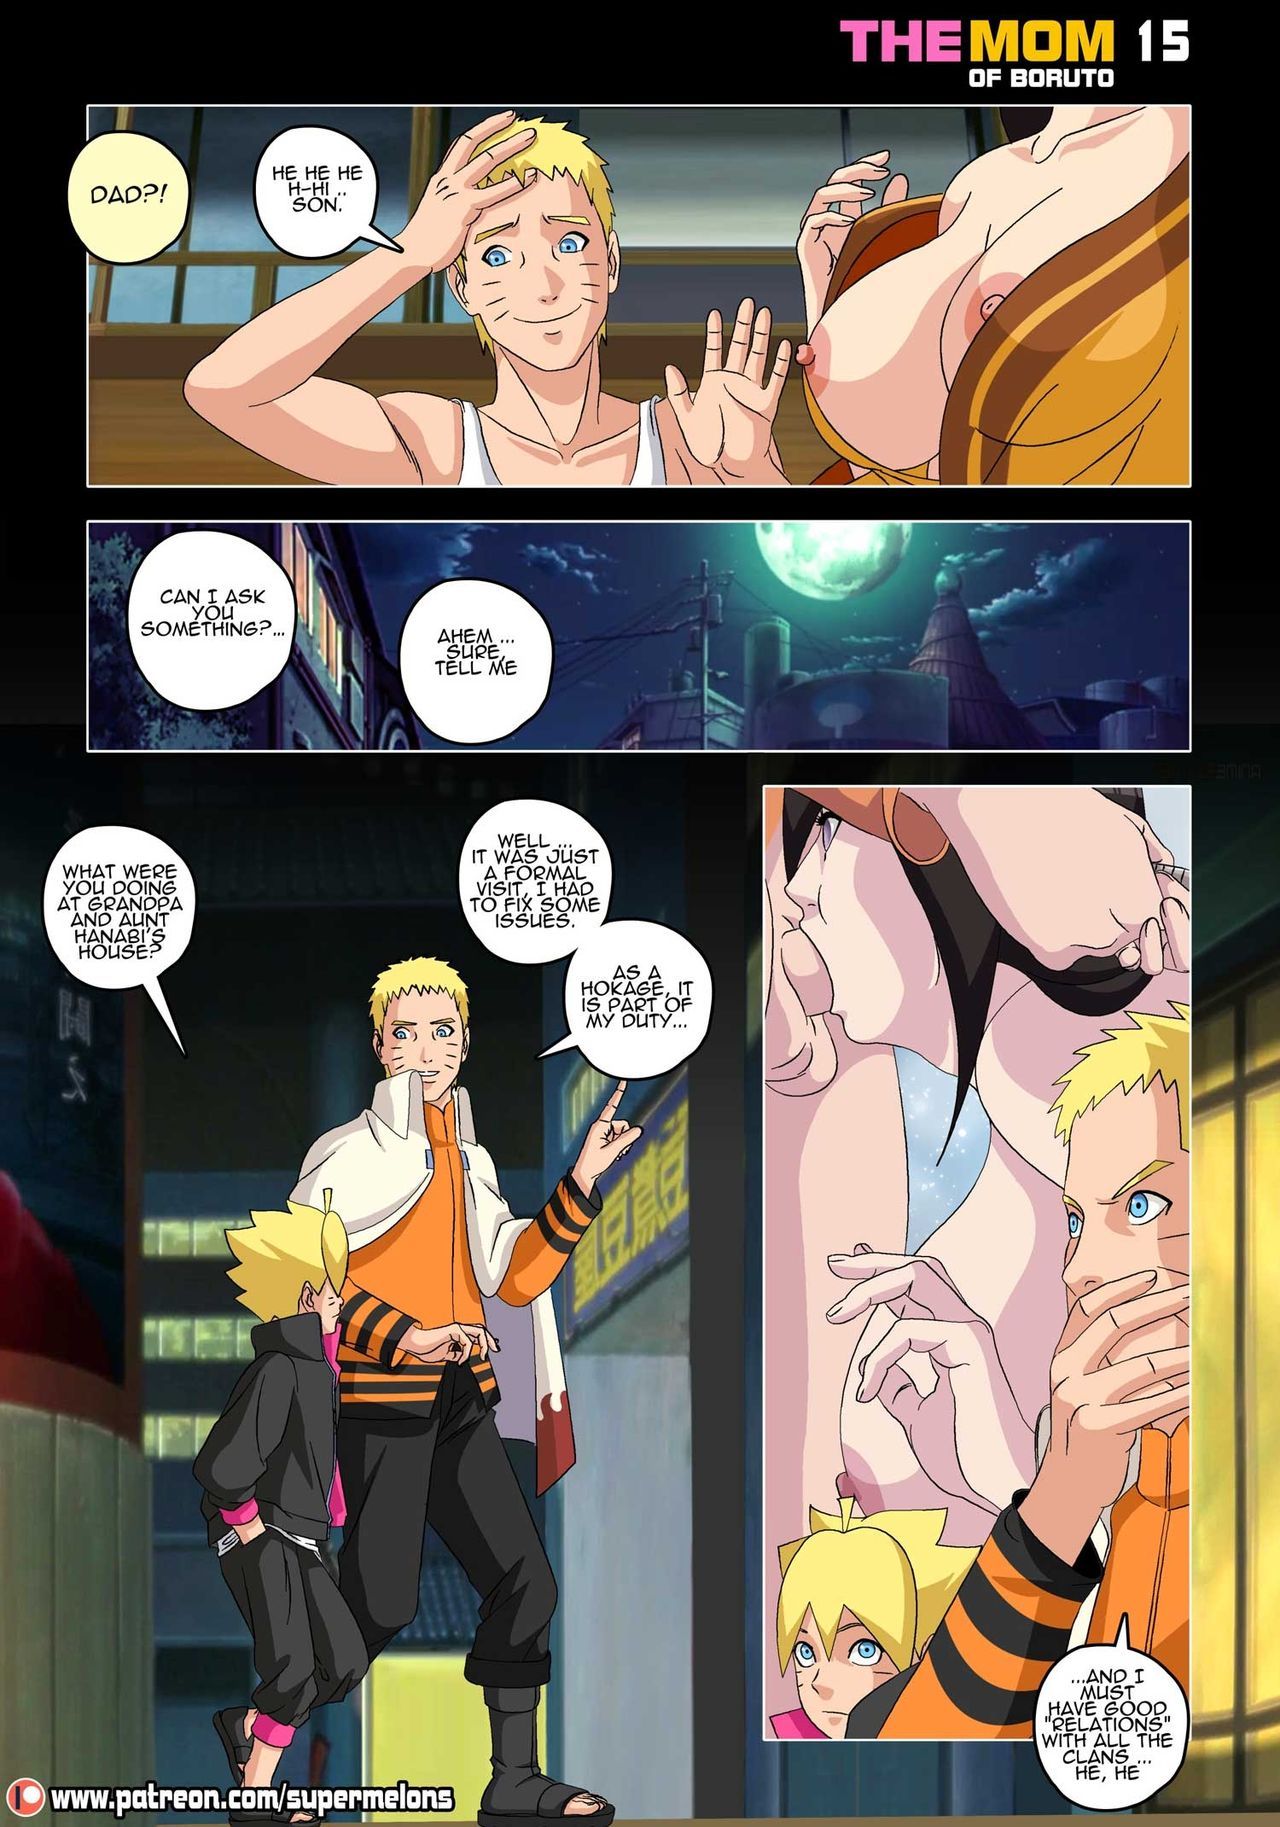 [Super Melons] The mom of Boruto [Ongoing] 16